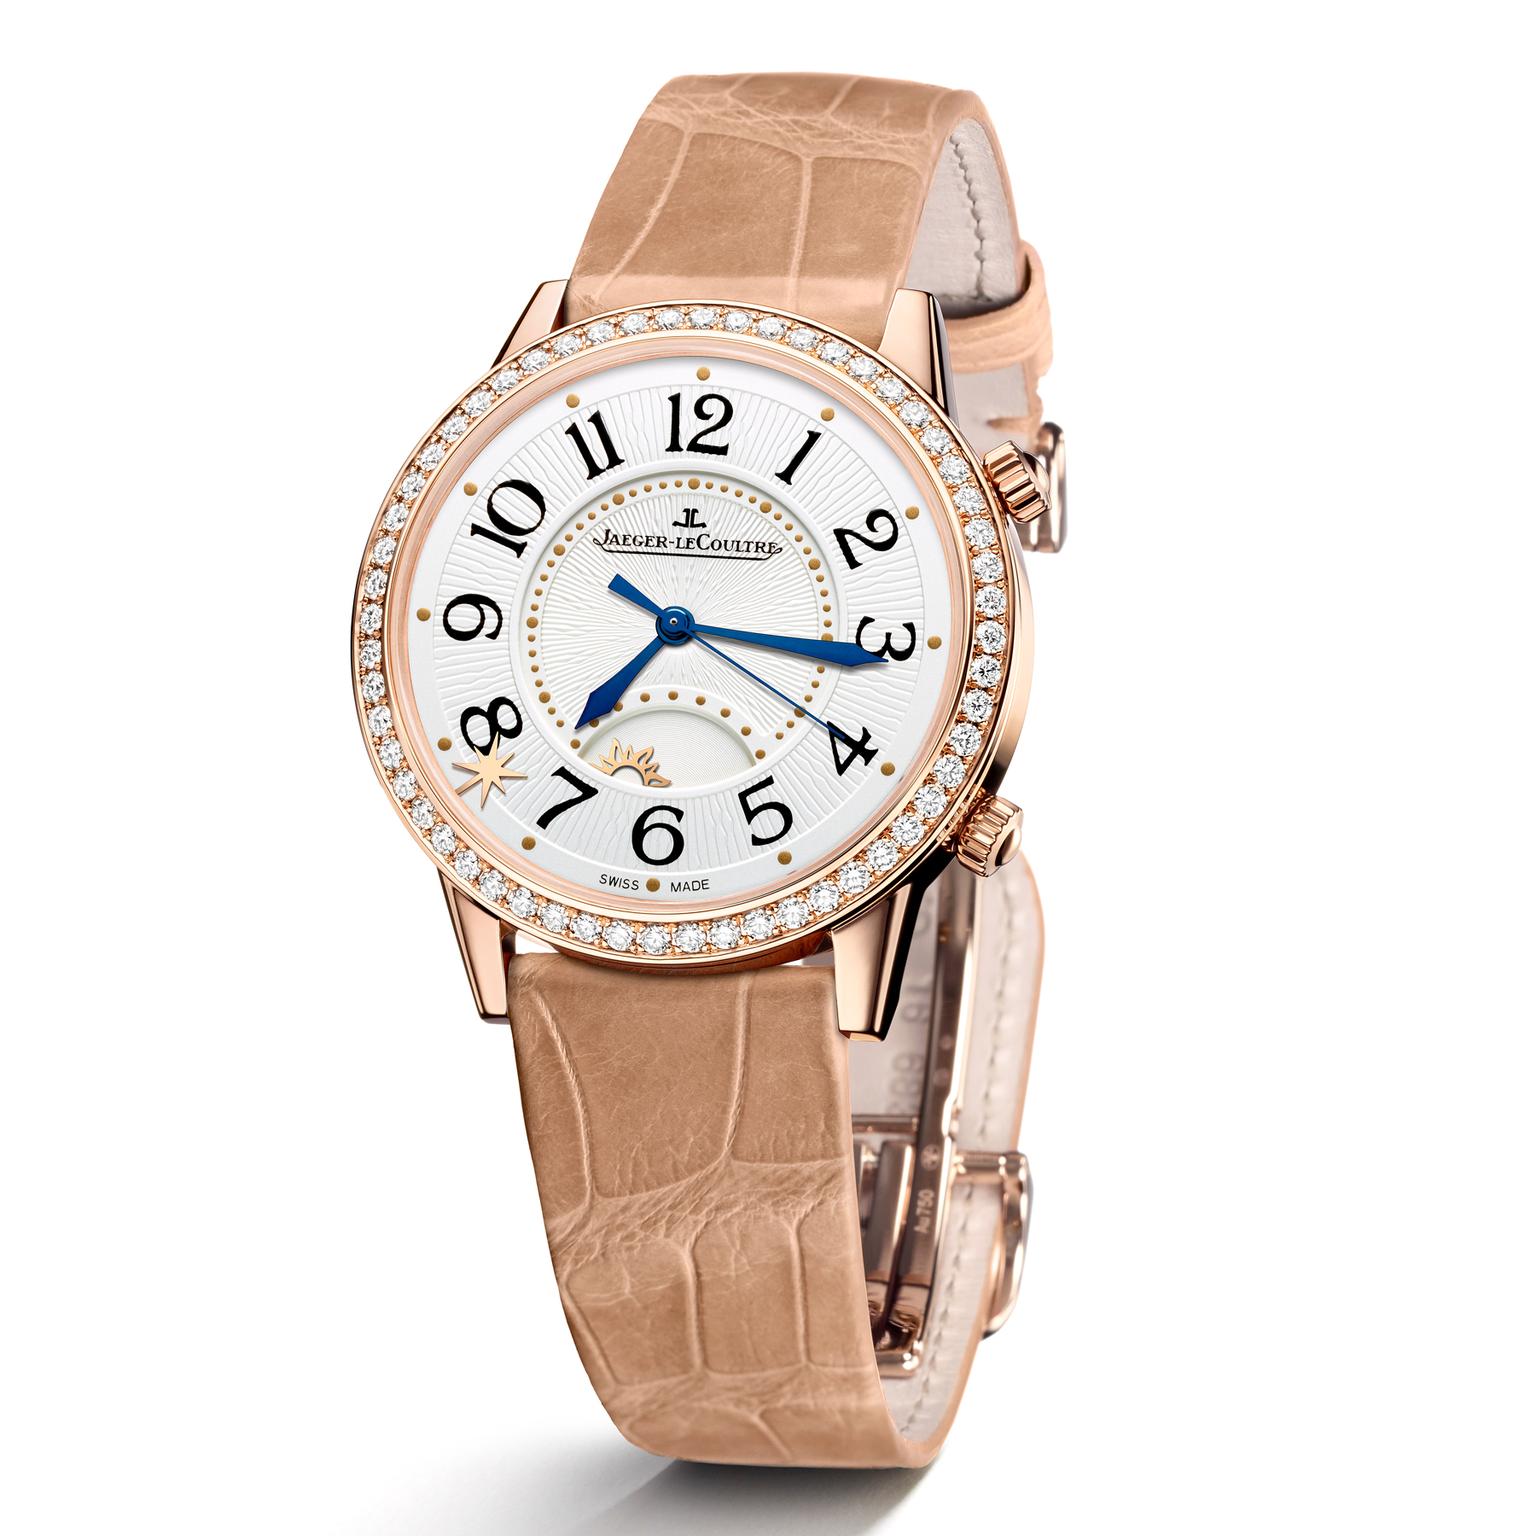 Jaeger-LeCoultre Rendez-Vous Sonatina Large in pink gold